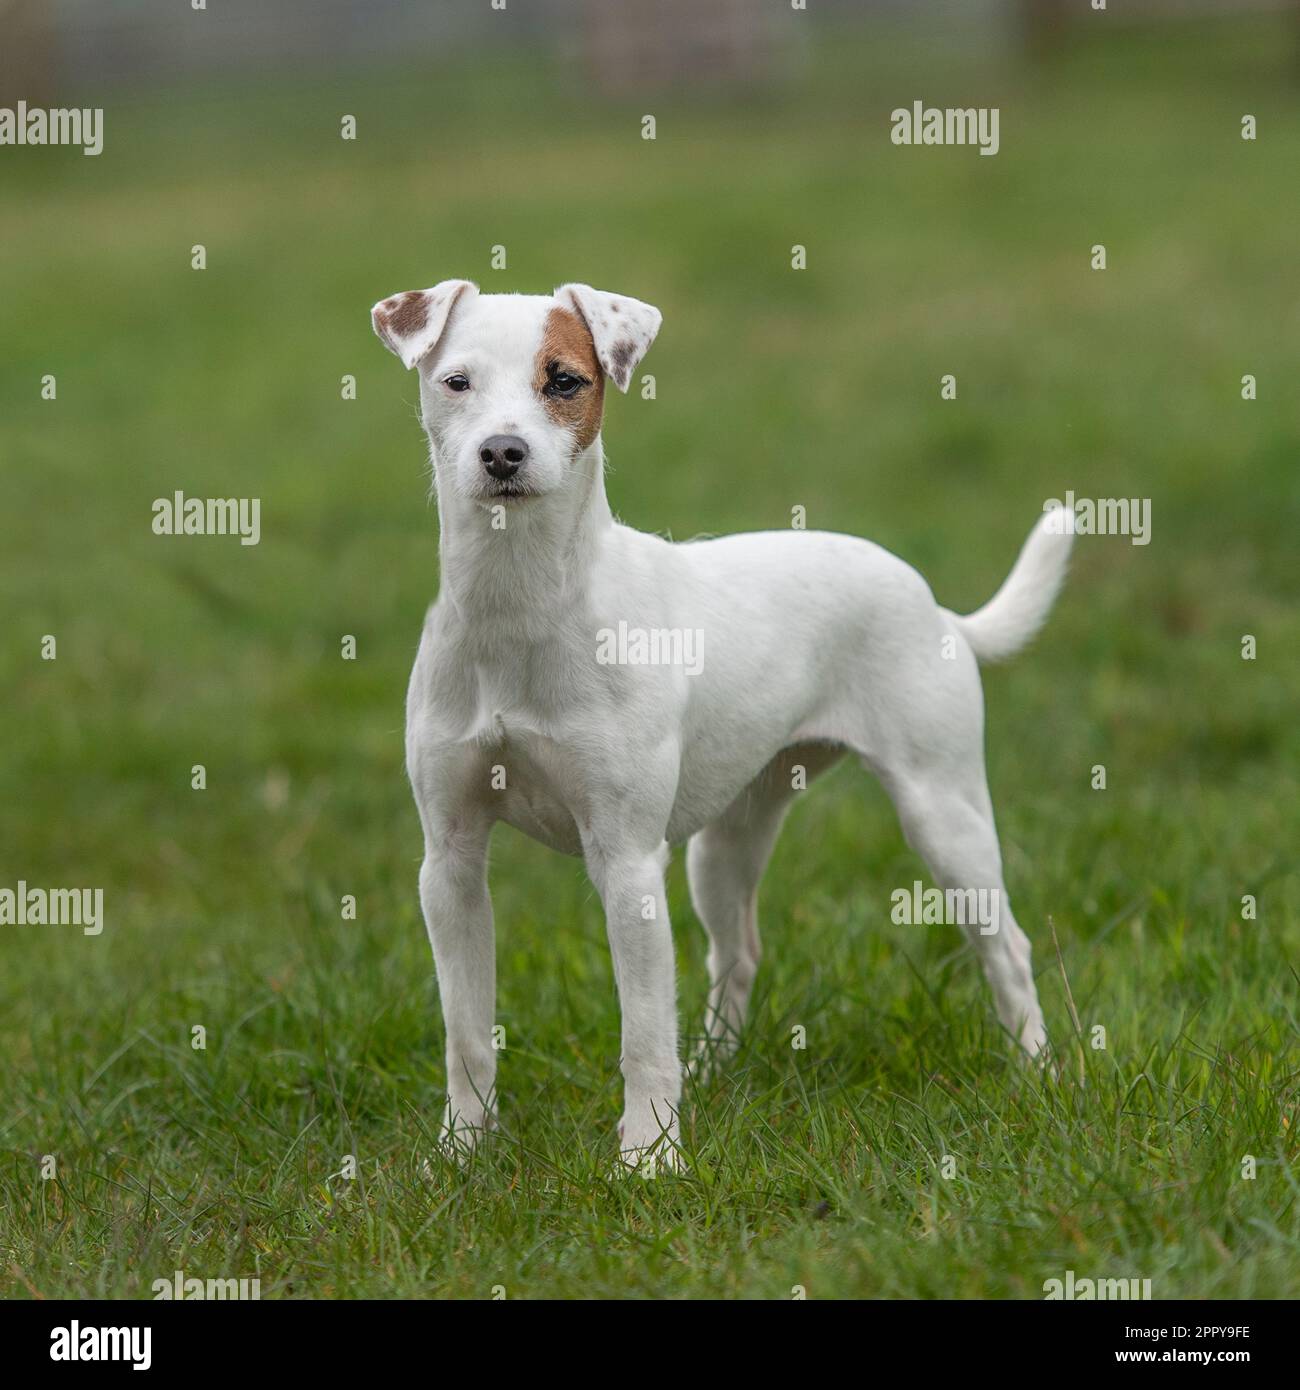 parson jack russell terrier Stock Photo